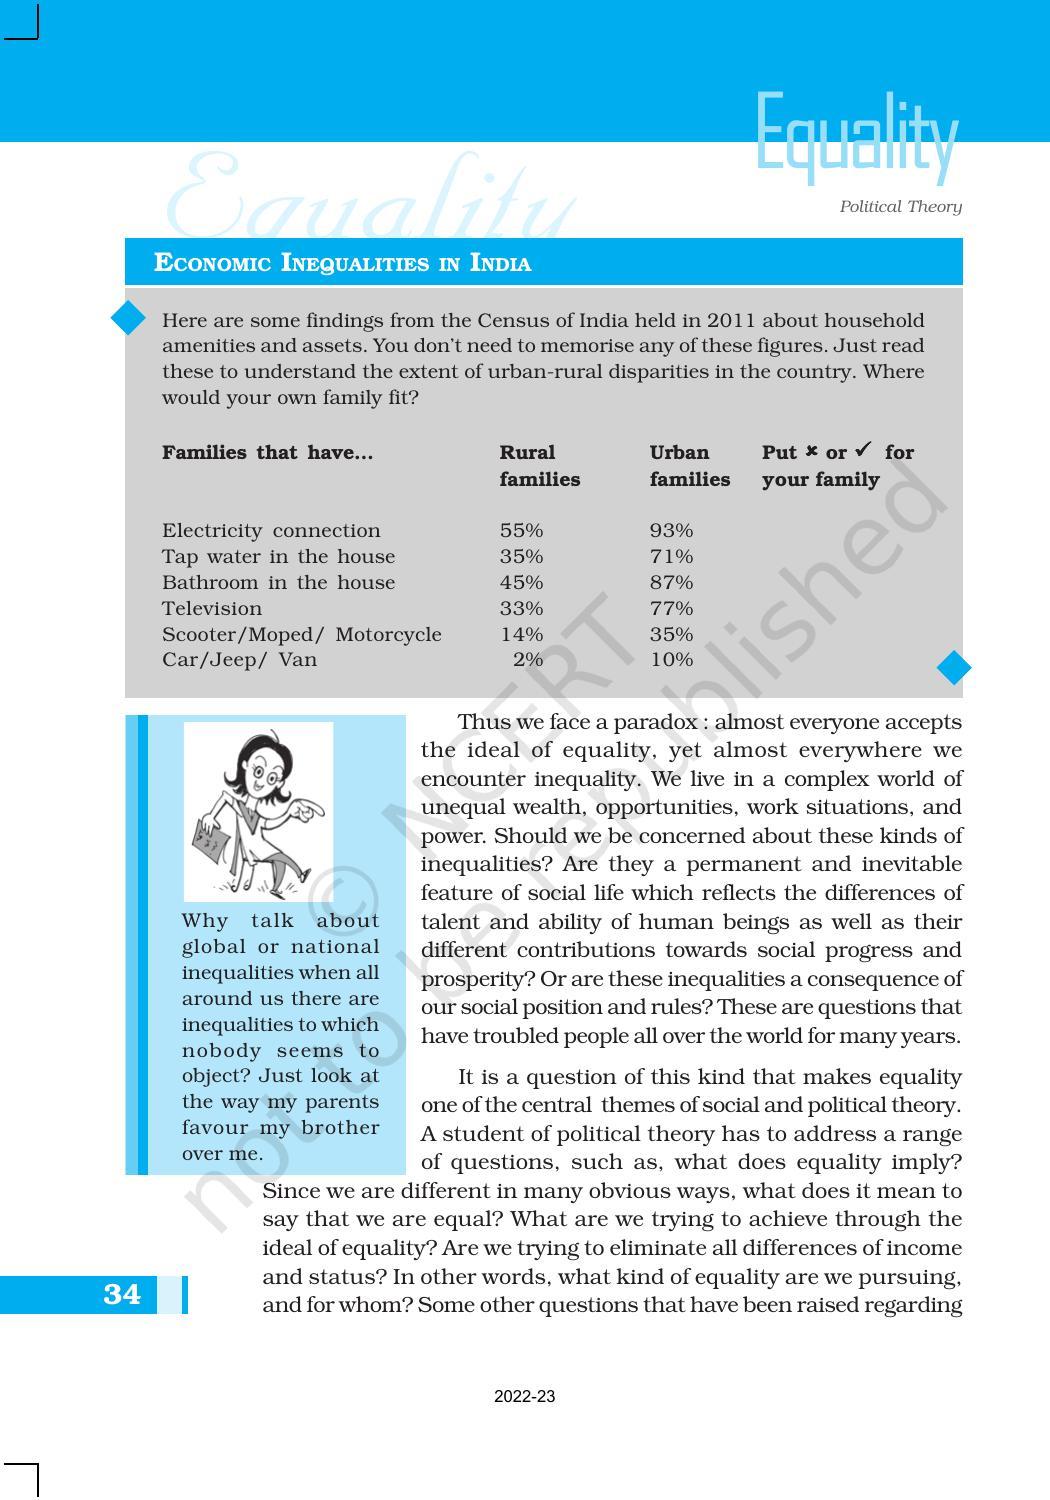 NCERT Book for Class 11 Political Science (Political Theory) Chapter 3 Equality - Page 4